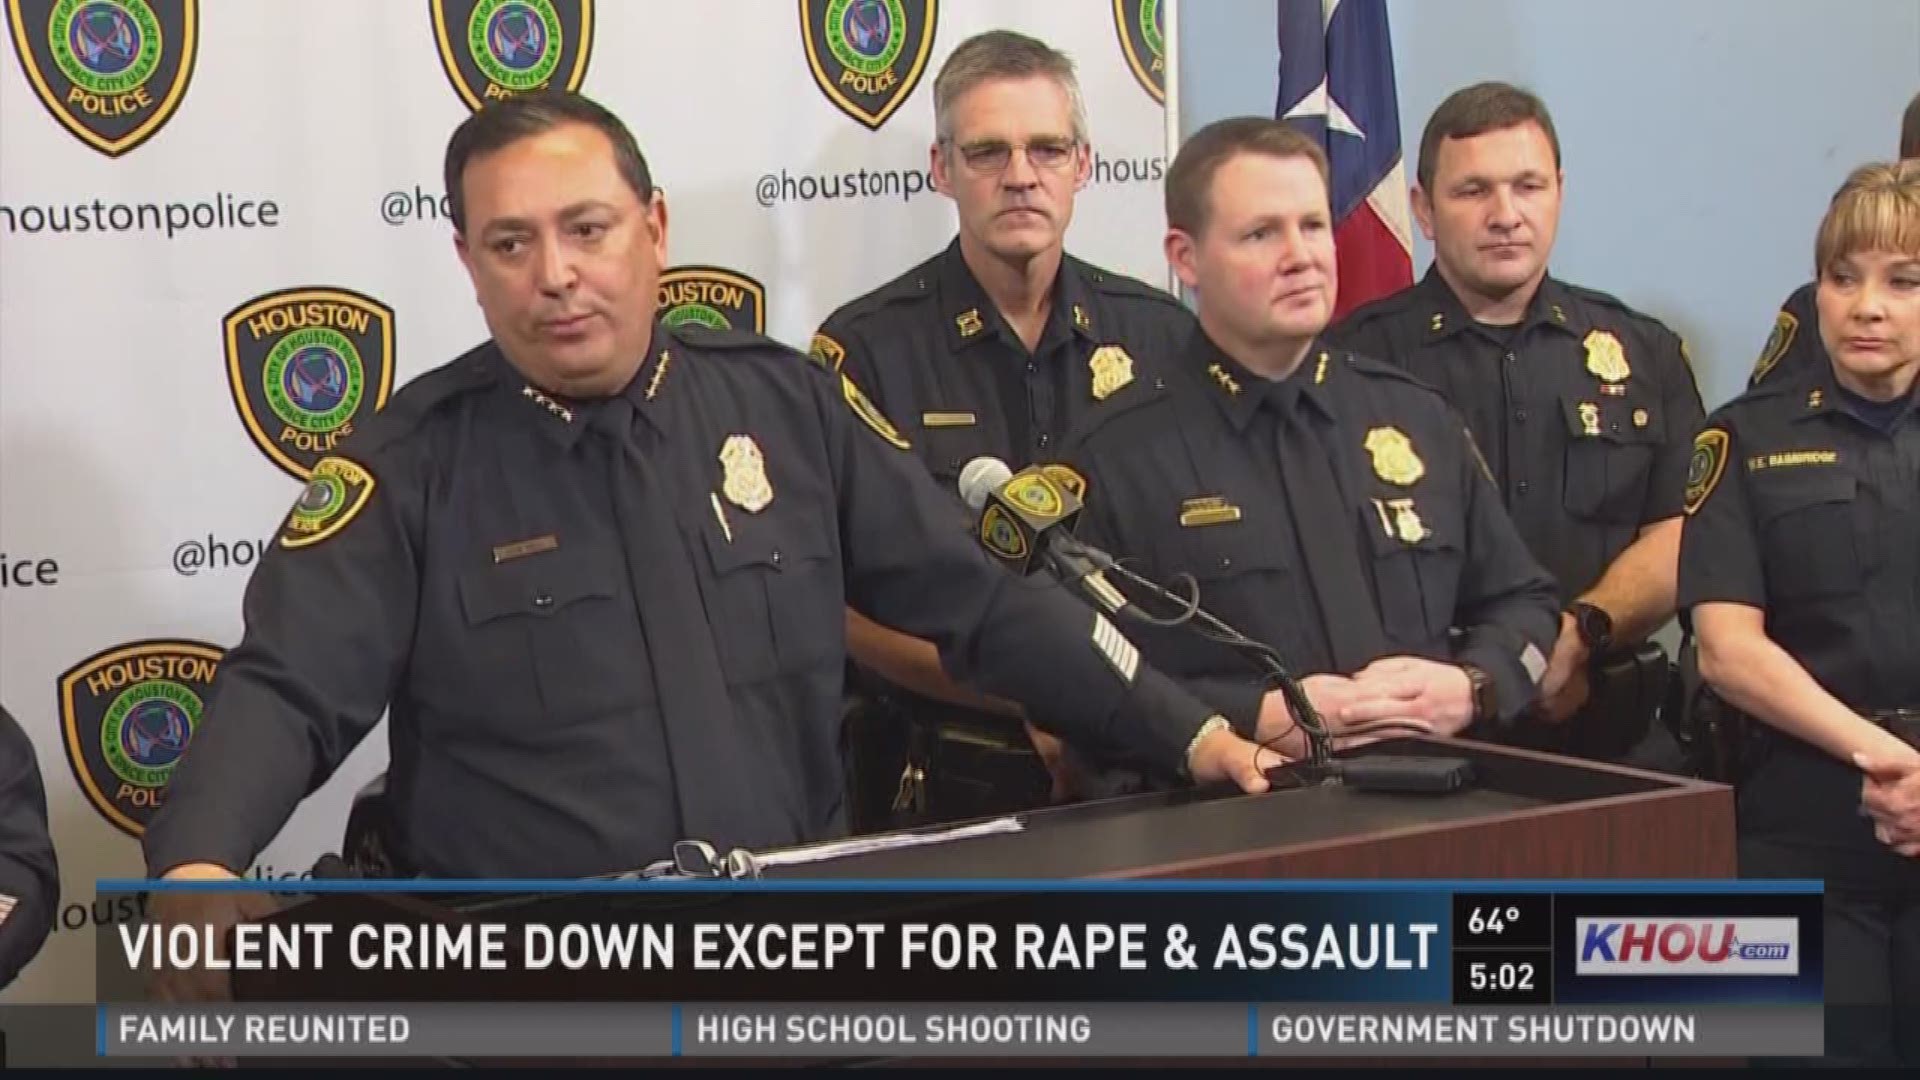 Police And Criminal Sex Hd Videos - HPD: Overall crime down in 2017, sex assaults up | khou.com